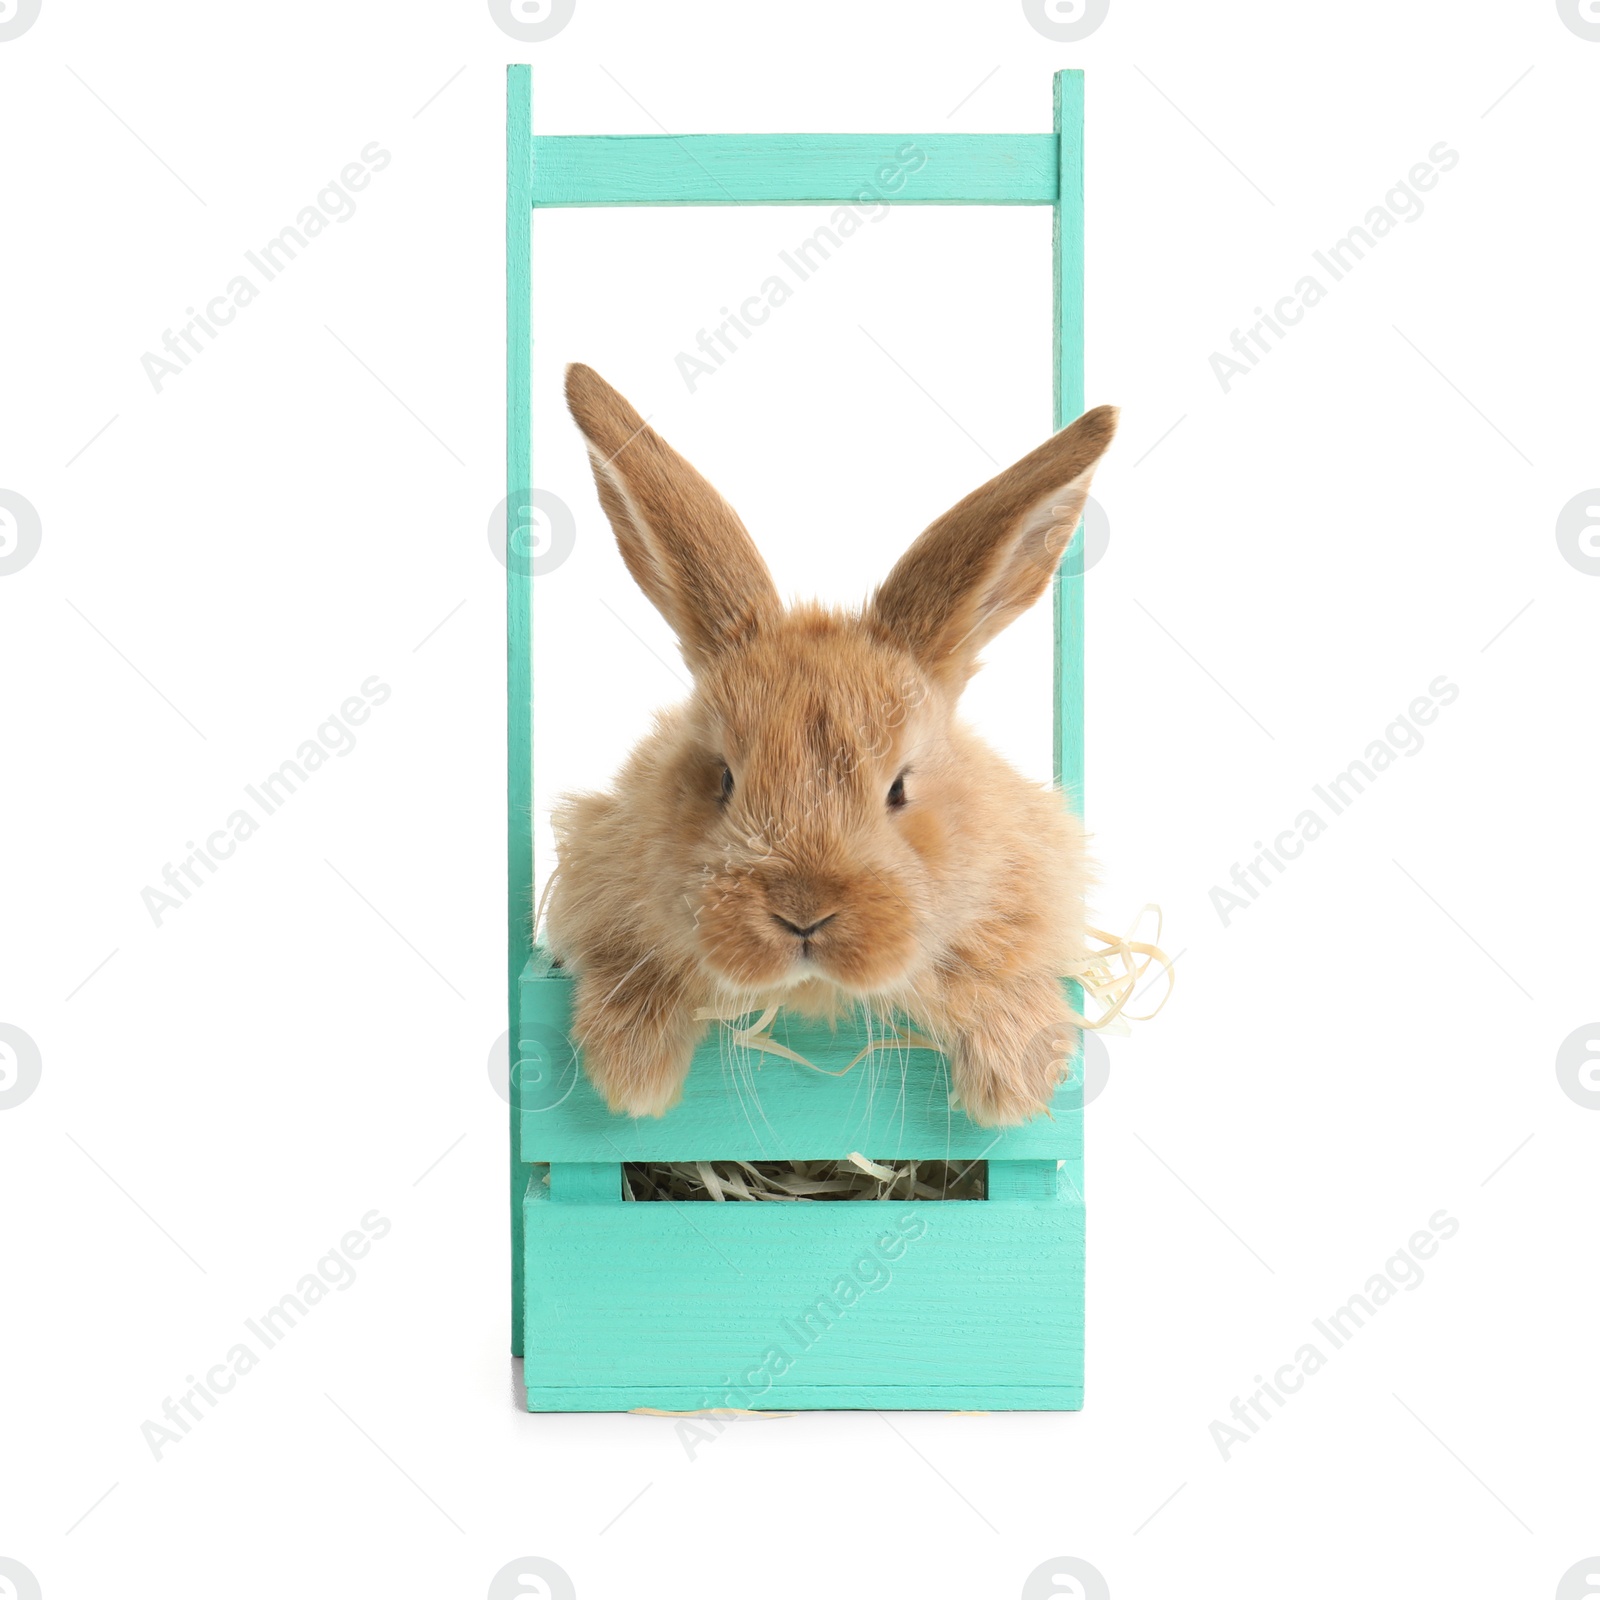 Photo of Adorable furry Easter bunny in decorative basket on white background